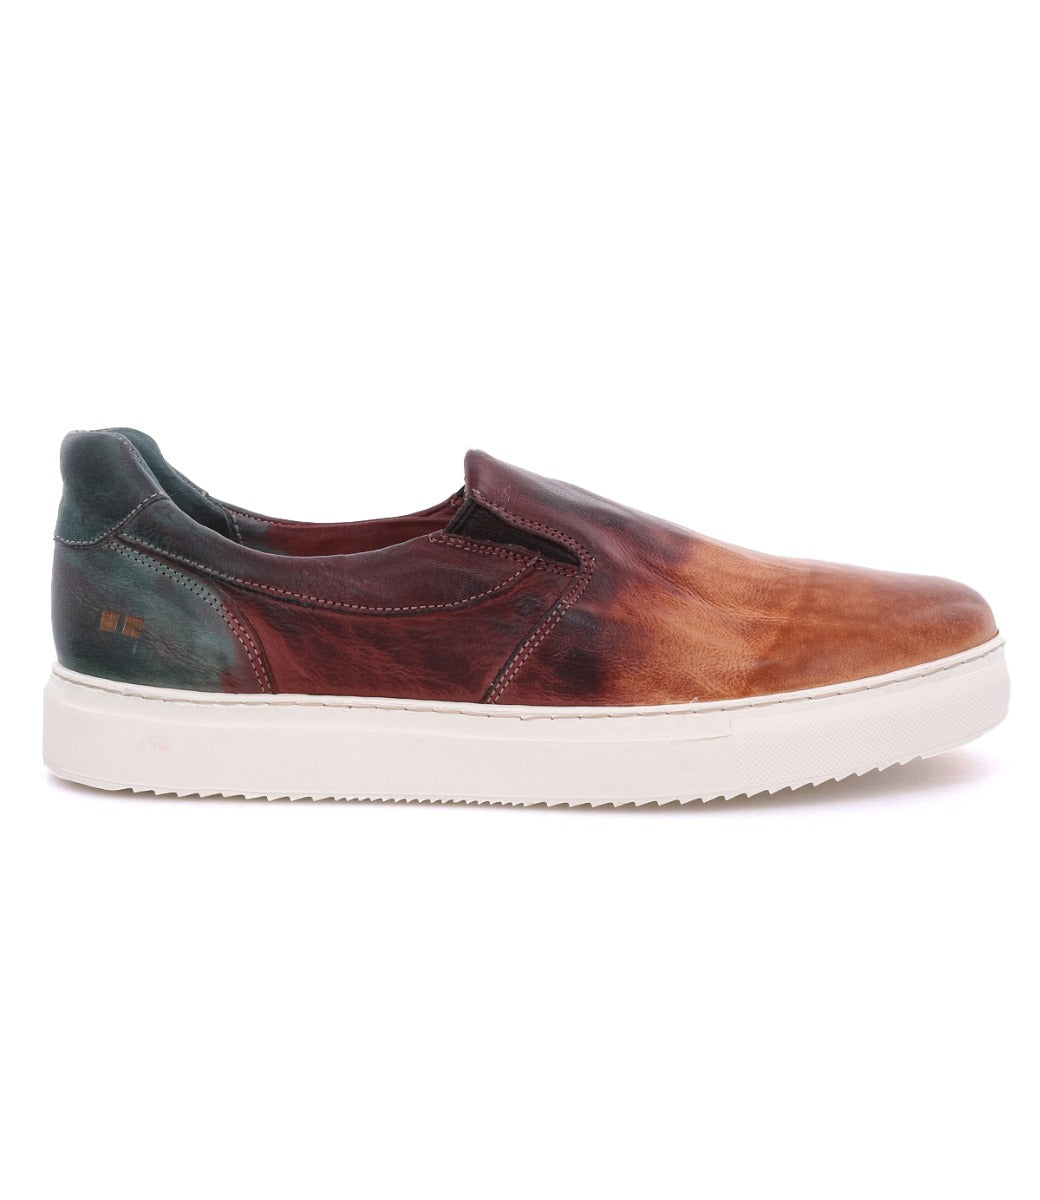 A men's slip on sneaker in a brown and green color, called the "Harry" by Bed Stu.